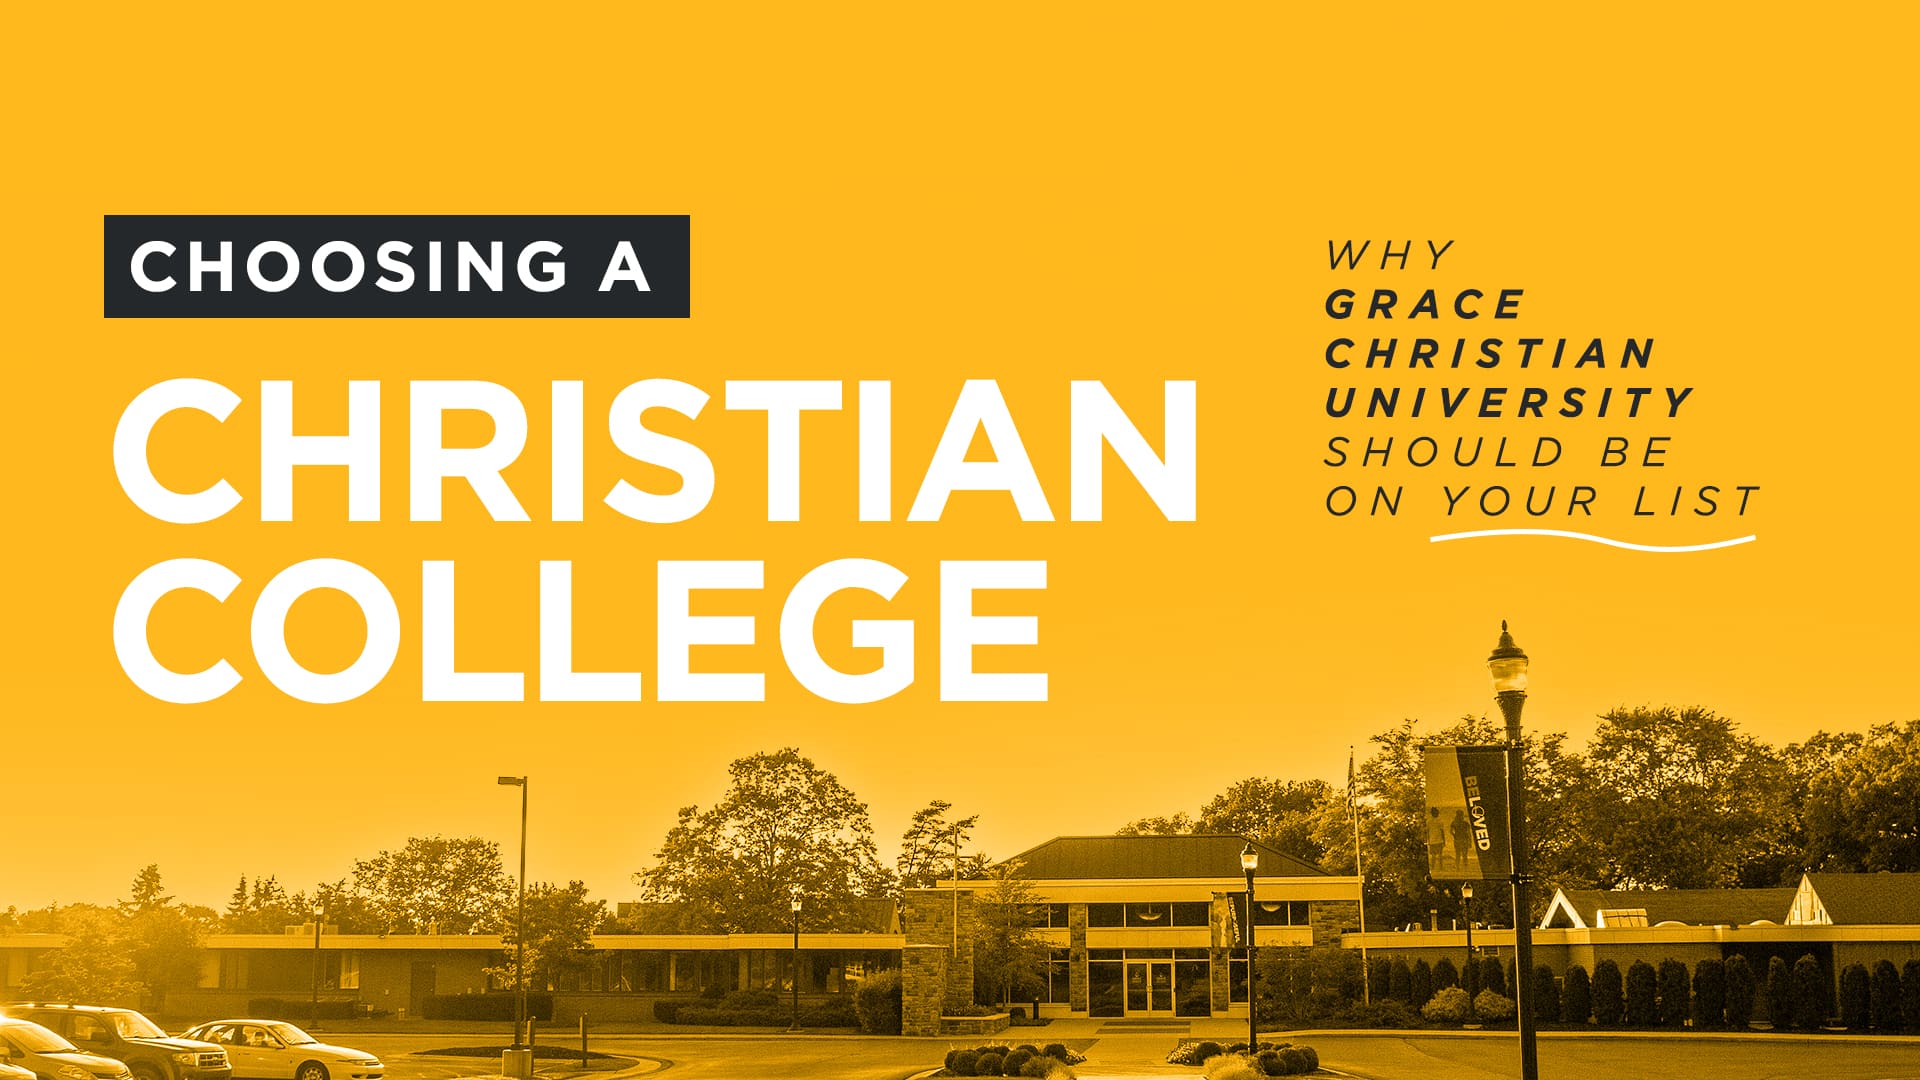 Choosing-a-Christian-College-Why-Grace-Christian-University-Should-be-on-Your-List